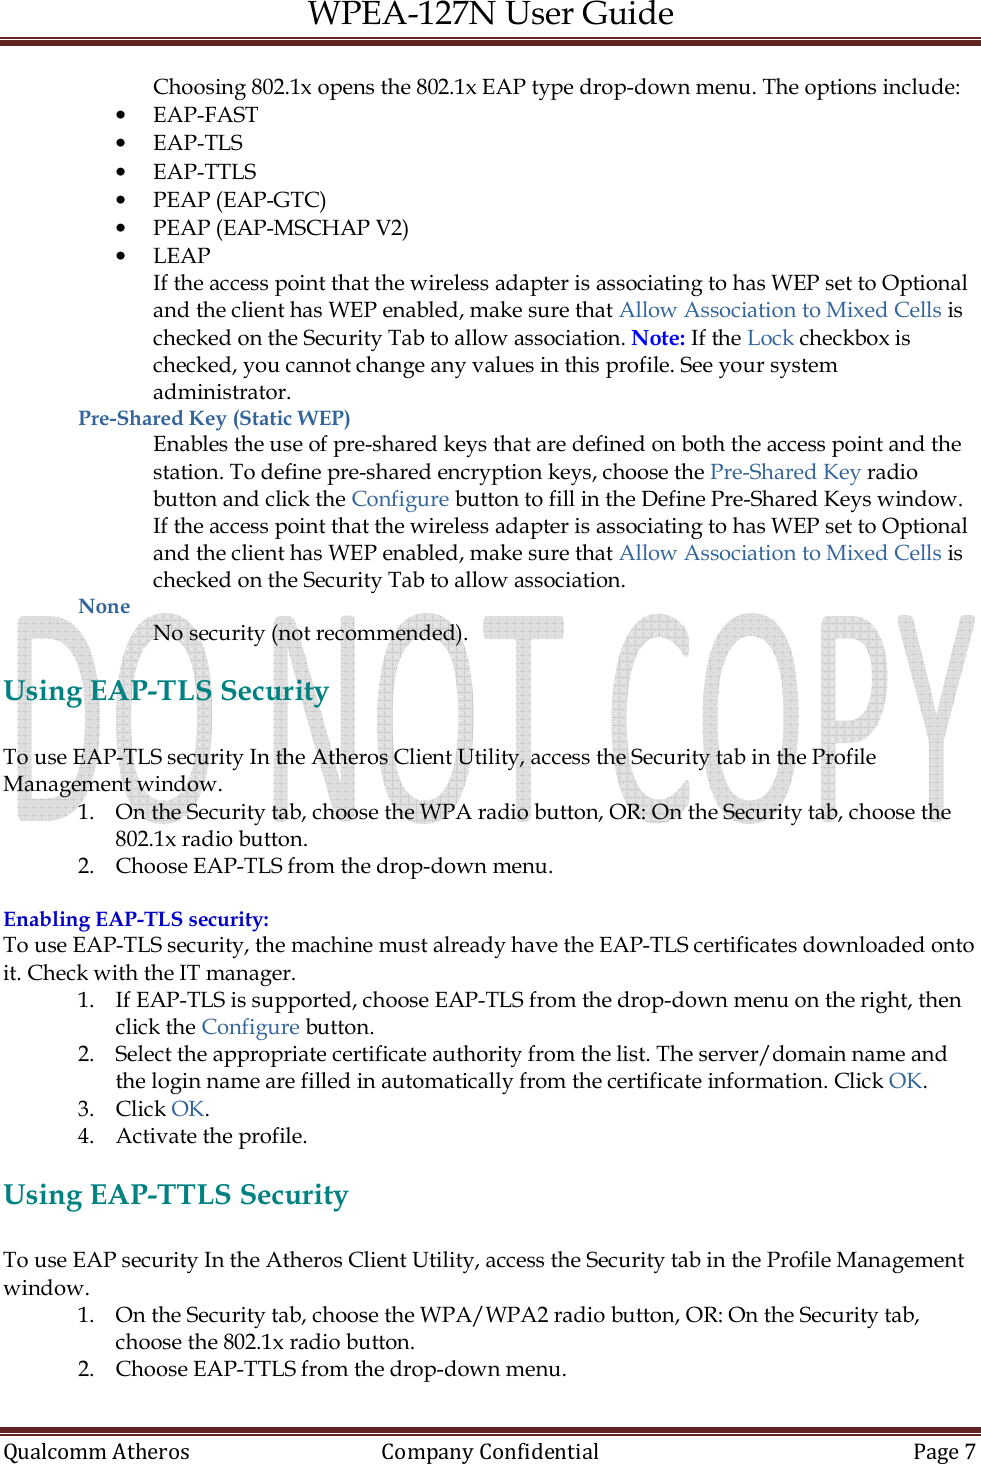 WPEA-127N User Guide  Qualcomm Atheros   Company Confidential  Page 7  Choosing 802.1x opens the 802.1x EAP type drop-down menu. The options include: • EAP-FAST • EAP-TLS • EAP-TTLS • PEAP (EAP-GTC) • PEAP (EAP-MSCHAP V2) • LEAP If the access point that the wireless adapter is associating to has WEP set to Optional and the client has WEP enabled, make sure that Allow Association to Mixed Cells is checked on the Security Tab to allow association. Note: If the Lock checkbox is checked, you cannot change any values in this profile. See your system administrator. Pre-Shared Key (Static WEP) Enables the use of pre-shared keys that are defined on both the access point and the station. To define pre-shared encryption keys, choose the Pre-Shared Key radio button and click the Configure button to fill in the Define Pre-Shared Keys window. If the access point that the wireless adapter is associating to has WEP set to Optional and the client has WEP enabled, make sure that Allow Association to Mixed Cells is checked on the Security Tab to allow association. None  No security (not recommended).  Using EAP-TLS Security  To use EAP-TLS security In the Atheros Client Utility, access the Security tab in the Profile Management window. 1. On the Security tab, choose the WPA radio button, OR: On the Security tab, choose the 802.1x radio button. 2. Choose EAP-TLS from the drop-down menu.  Enabling EAP-TLS security: To use EAP-TLS security, the machine must already have the EAP-TLS certificates downloaded onto it. Check with the IT manager. 1. If EAP-TLS is supported, choose EAP-TLS from the drop-down menu on the right, then click the Configure button. 2. Select the appropriate certificate authority from the list. The server/domain name and the login name are filled in automatically from the certificate information. Click OK. 3. Click OK. 4. Activate the profile.  Using EAP-TTLS Security  To use EAP security In the Atheros Client Utility, access the Security tab in the Profile Management window. 1. On the Security tab, choose the WPA/WPA2 radio button, OR: On the Security tab, choose the 802.1x radio button. 2. Choose EAP-TTLS from the drop-down menu.  